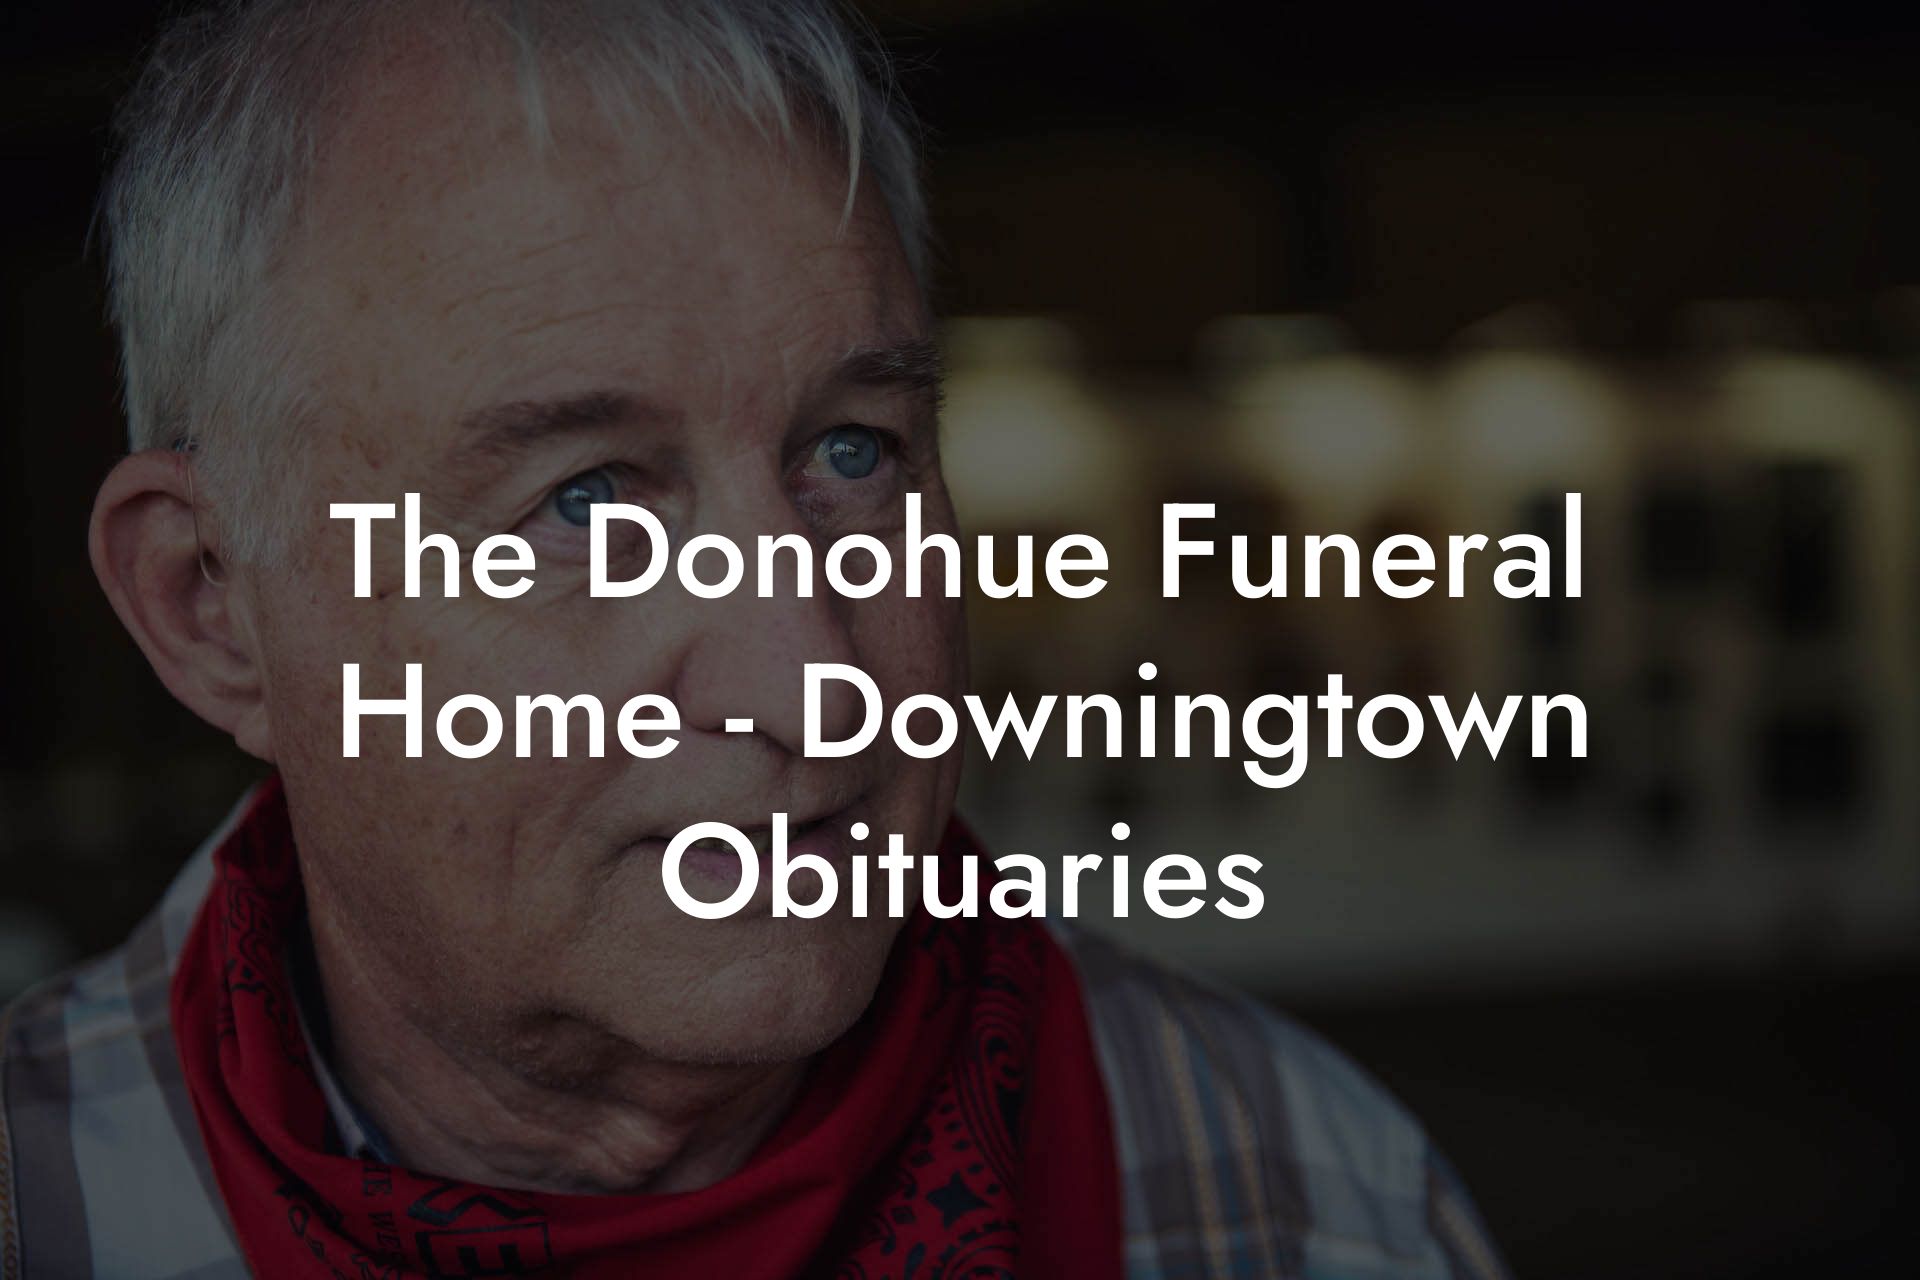 The Donohue Funeral Home - Downingtown Obituaries